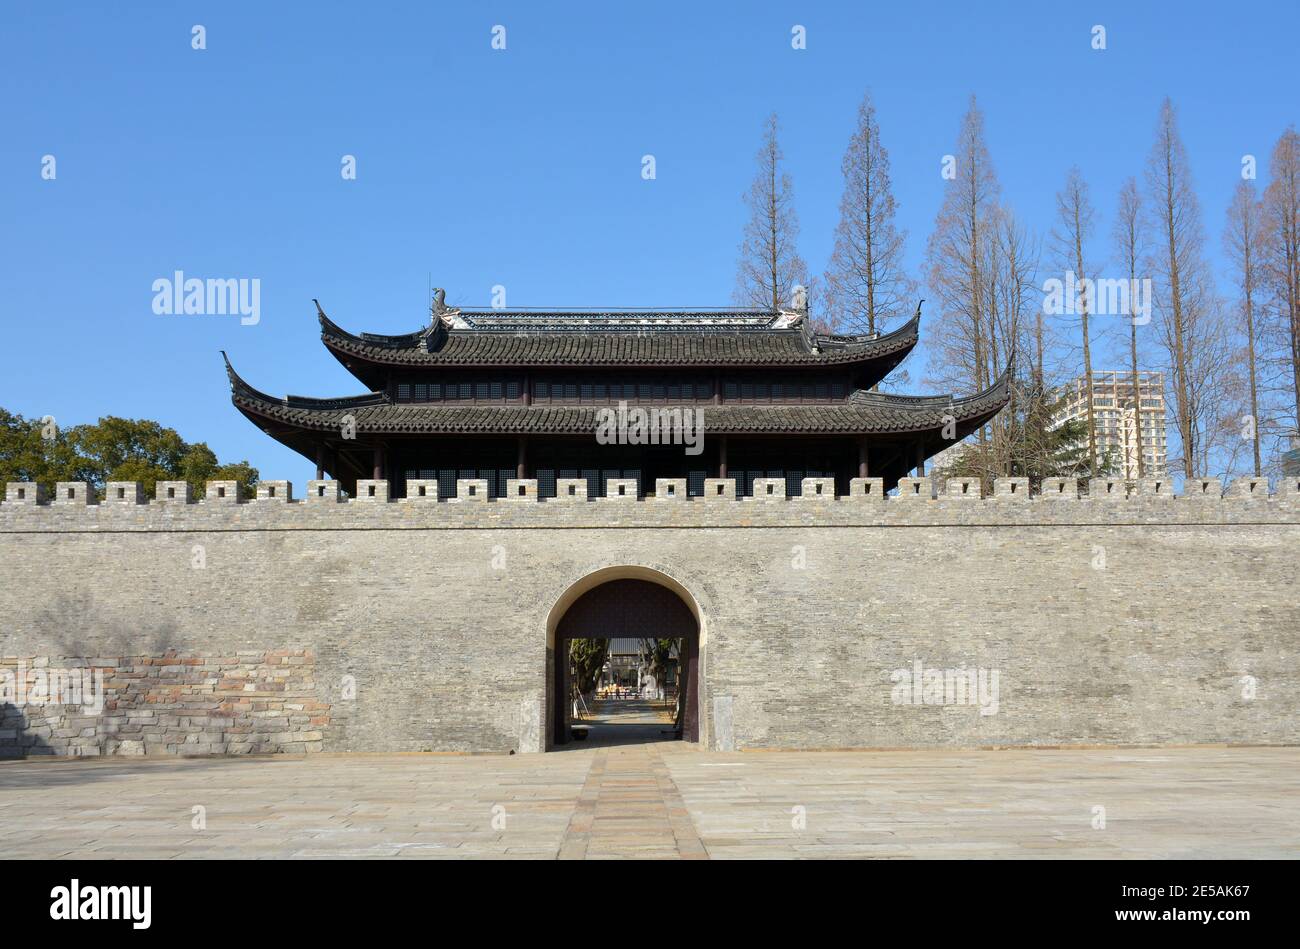 Zicheng, oldest and original watchtower in Jiaxing, Zhejiang. Dates back to Tang dynasty.Currently under renovation Jan 2021 Stock Photo